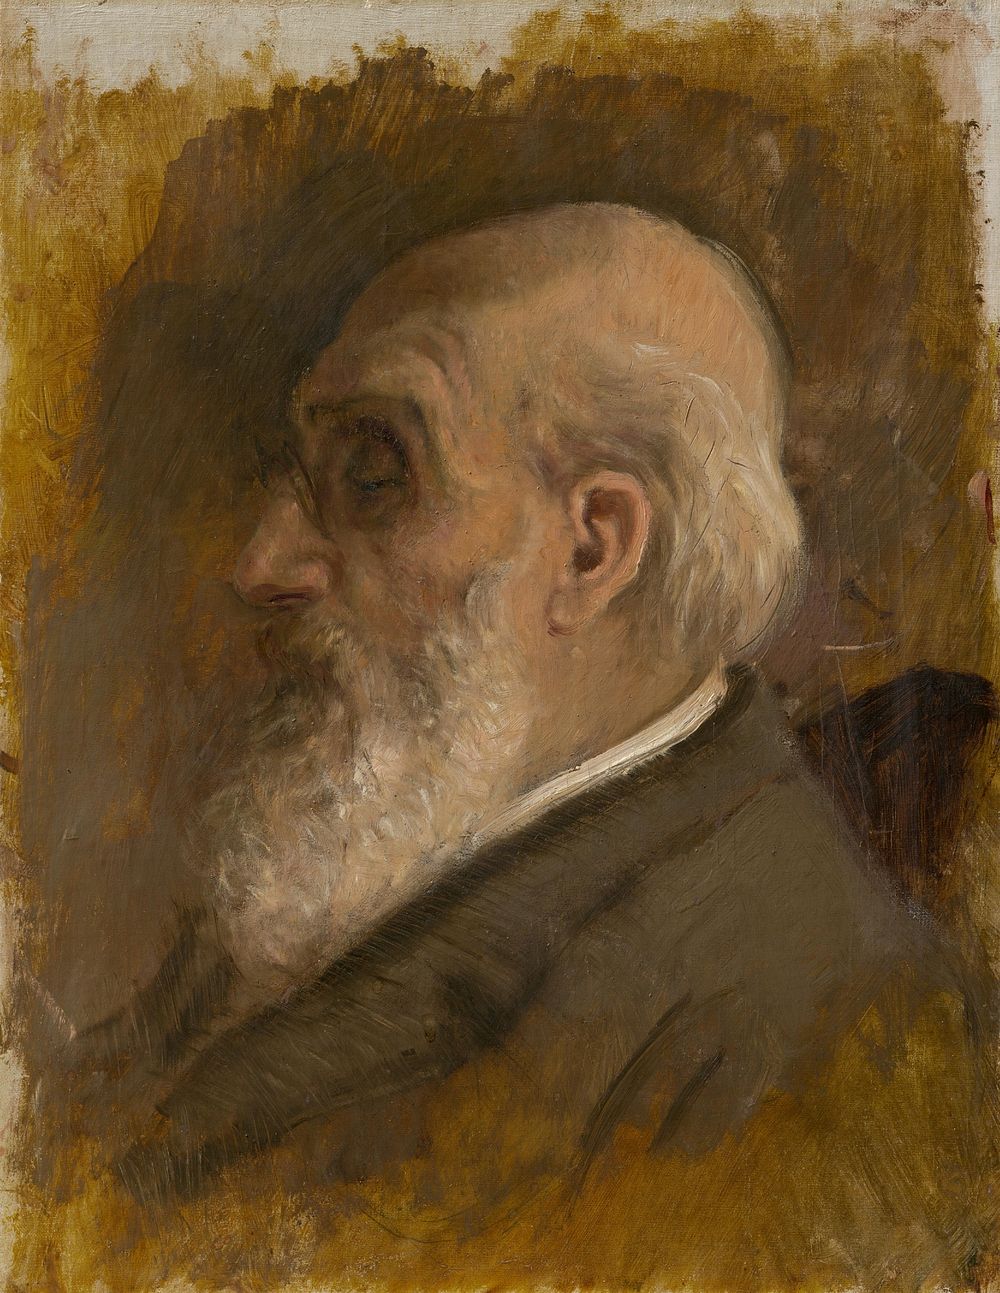 Painter's father profile with pince-nez by Ladislav Mednyánszky